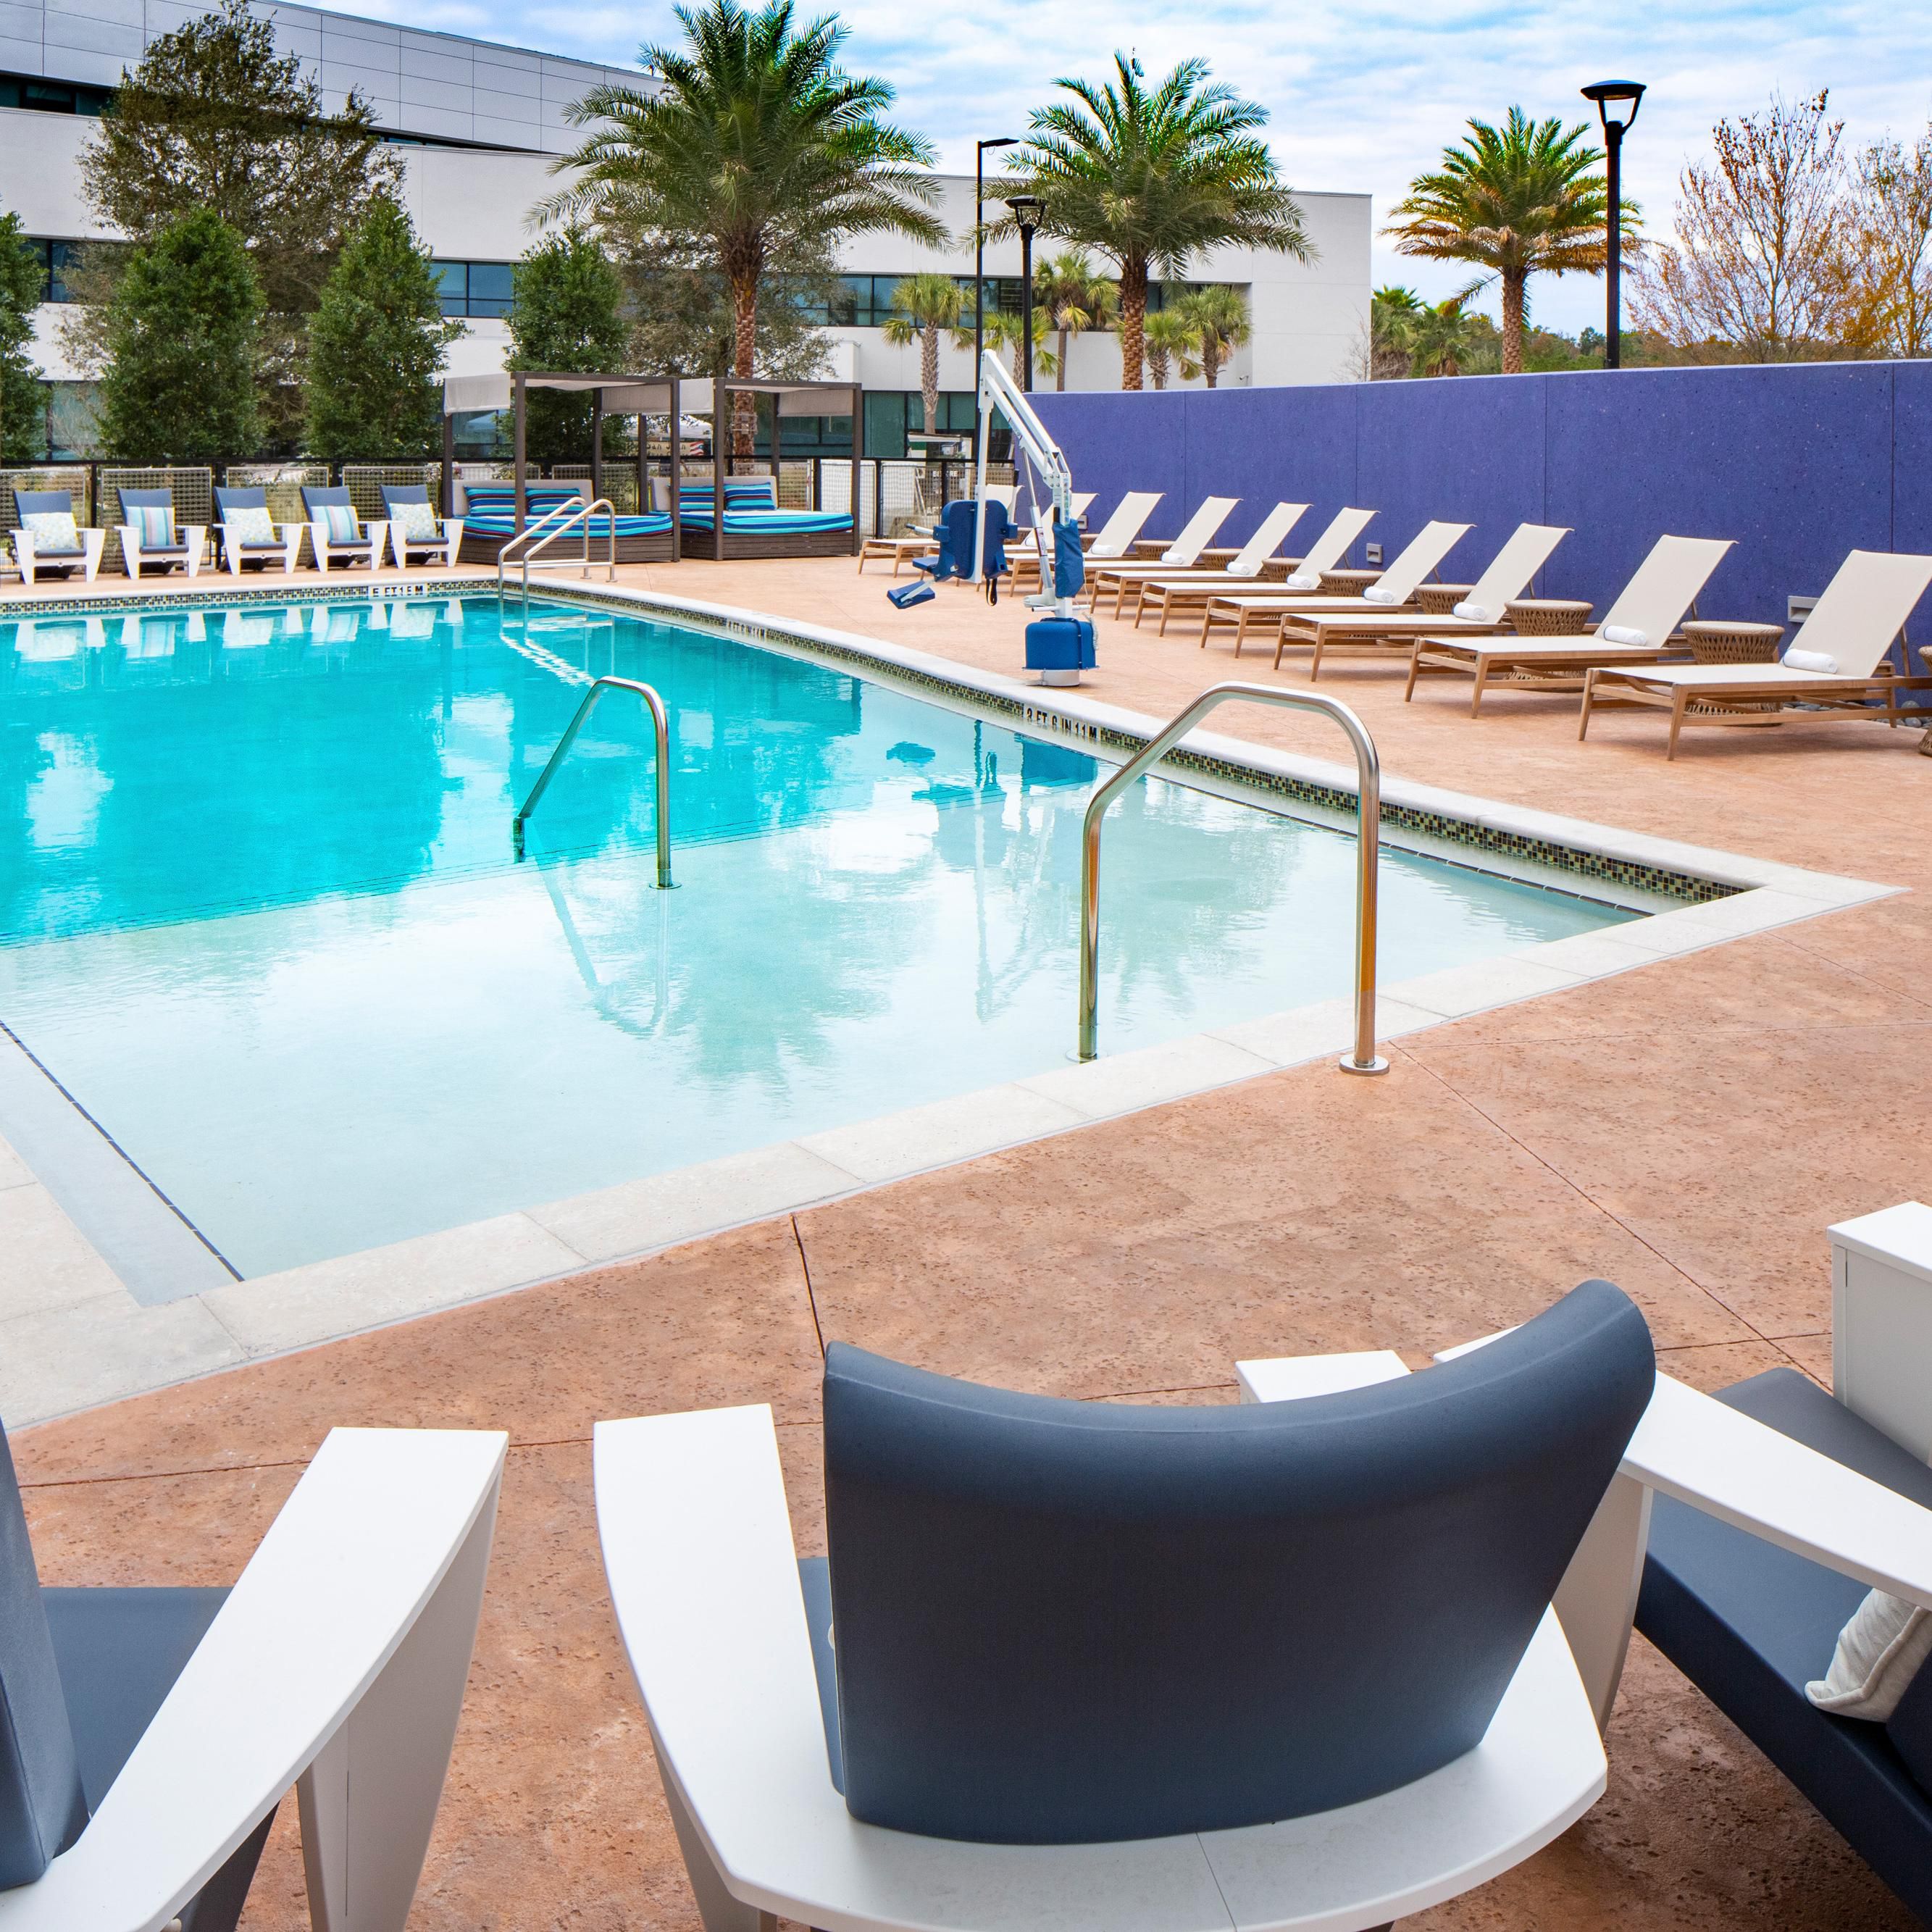 Enjoy total relaxation in a cabana poolside